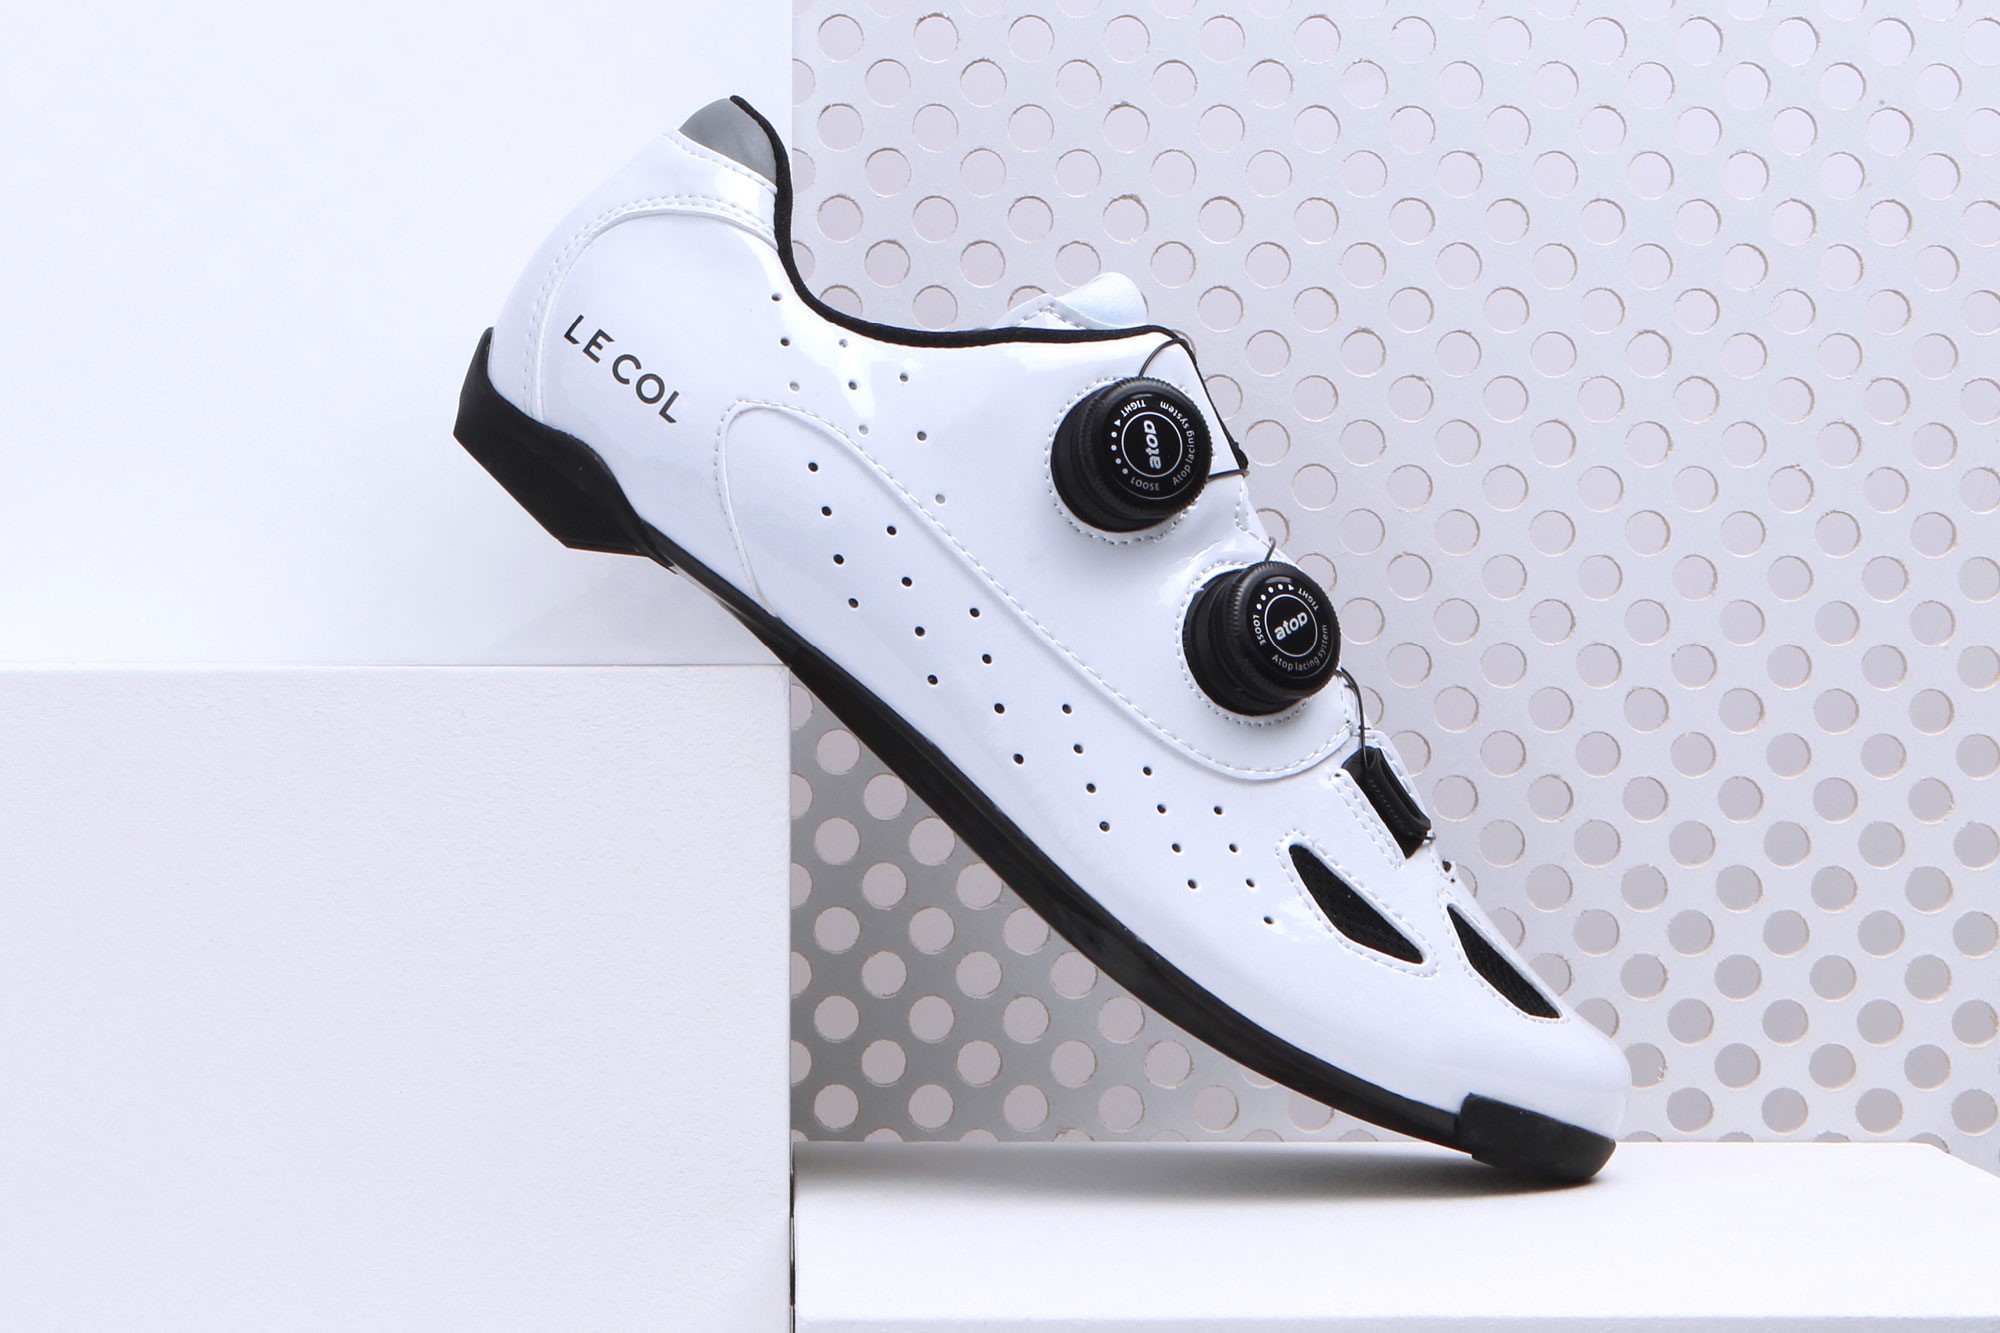 Buy > le col pro carbon cycling shoes > in stock